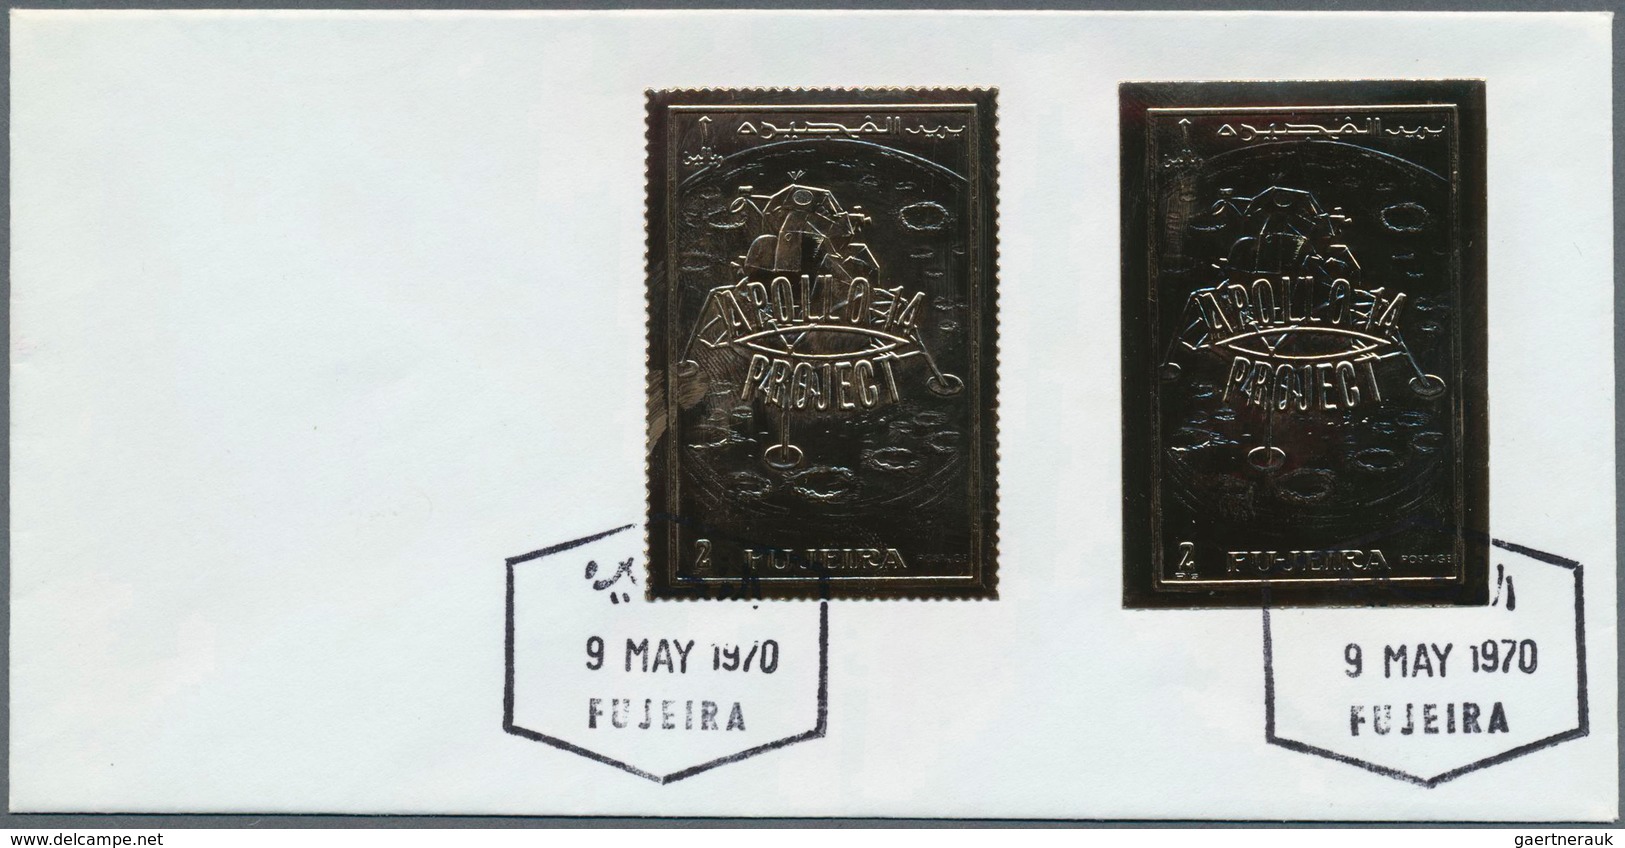 Fudschaira / Fujeira: 1970, GOLD/SILVER ISSUE "Apollo 14 Project", 2r. Silver And 2r. Gold Perf. And - Fujeira